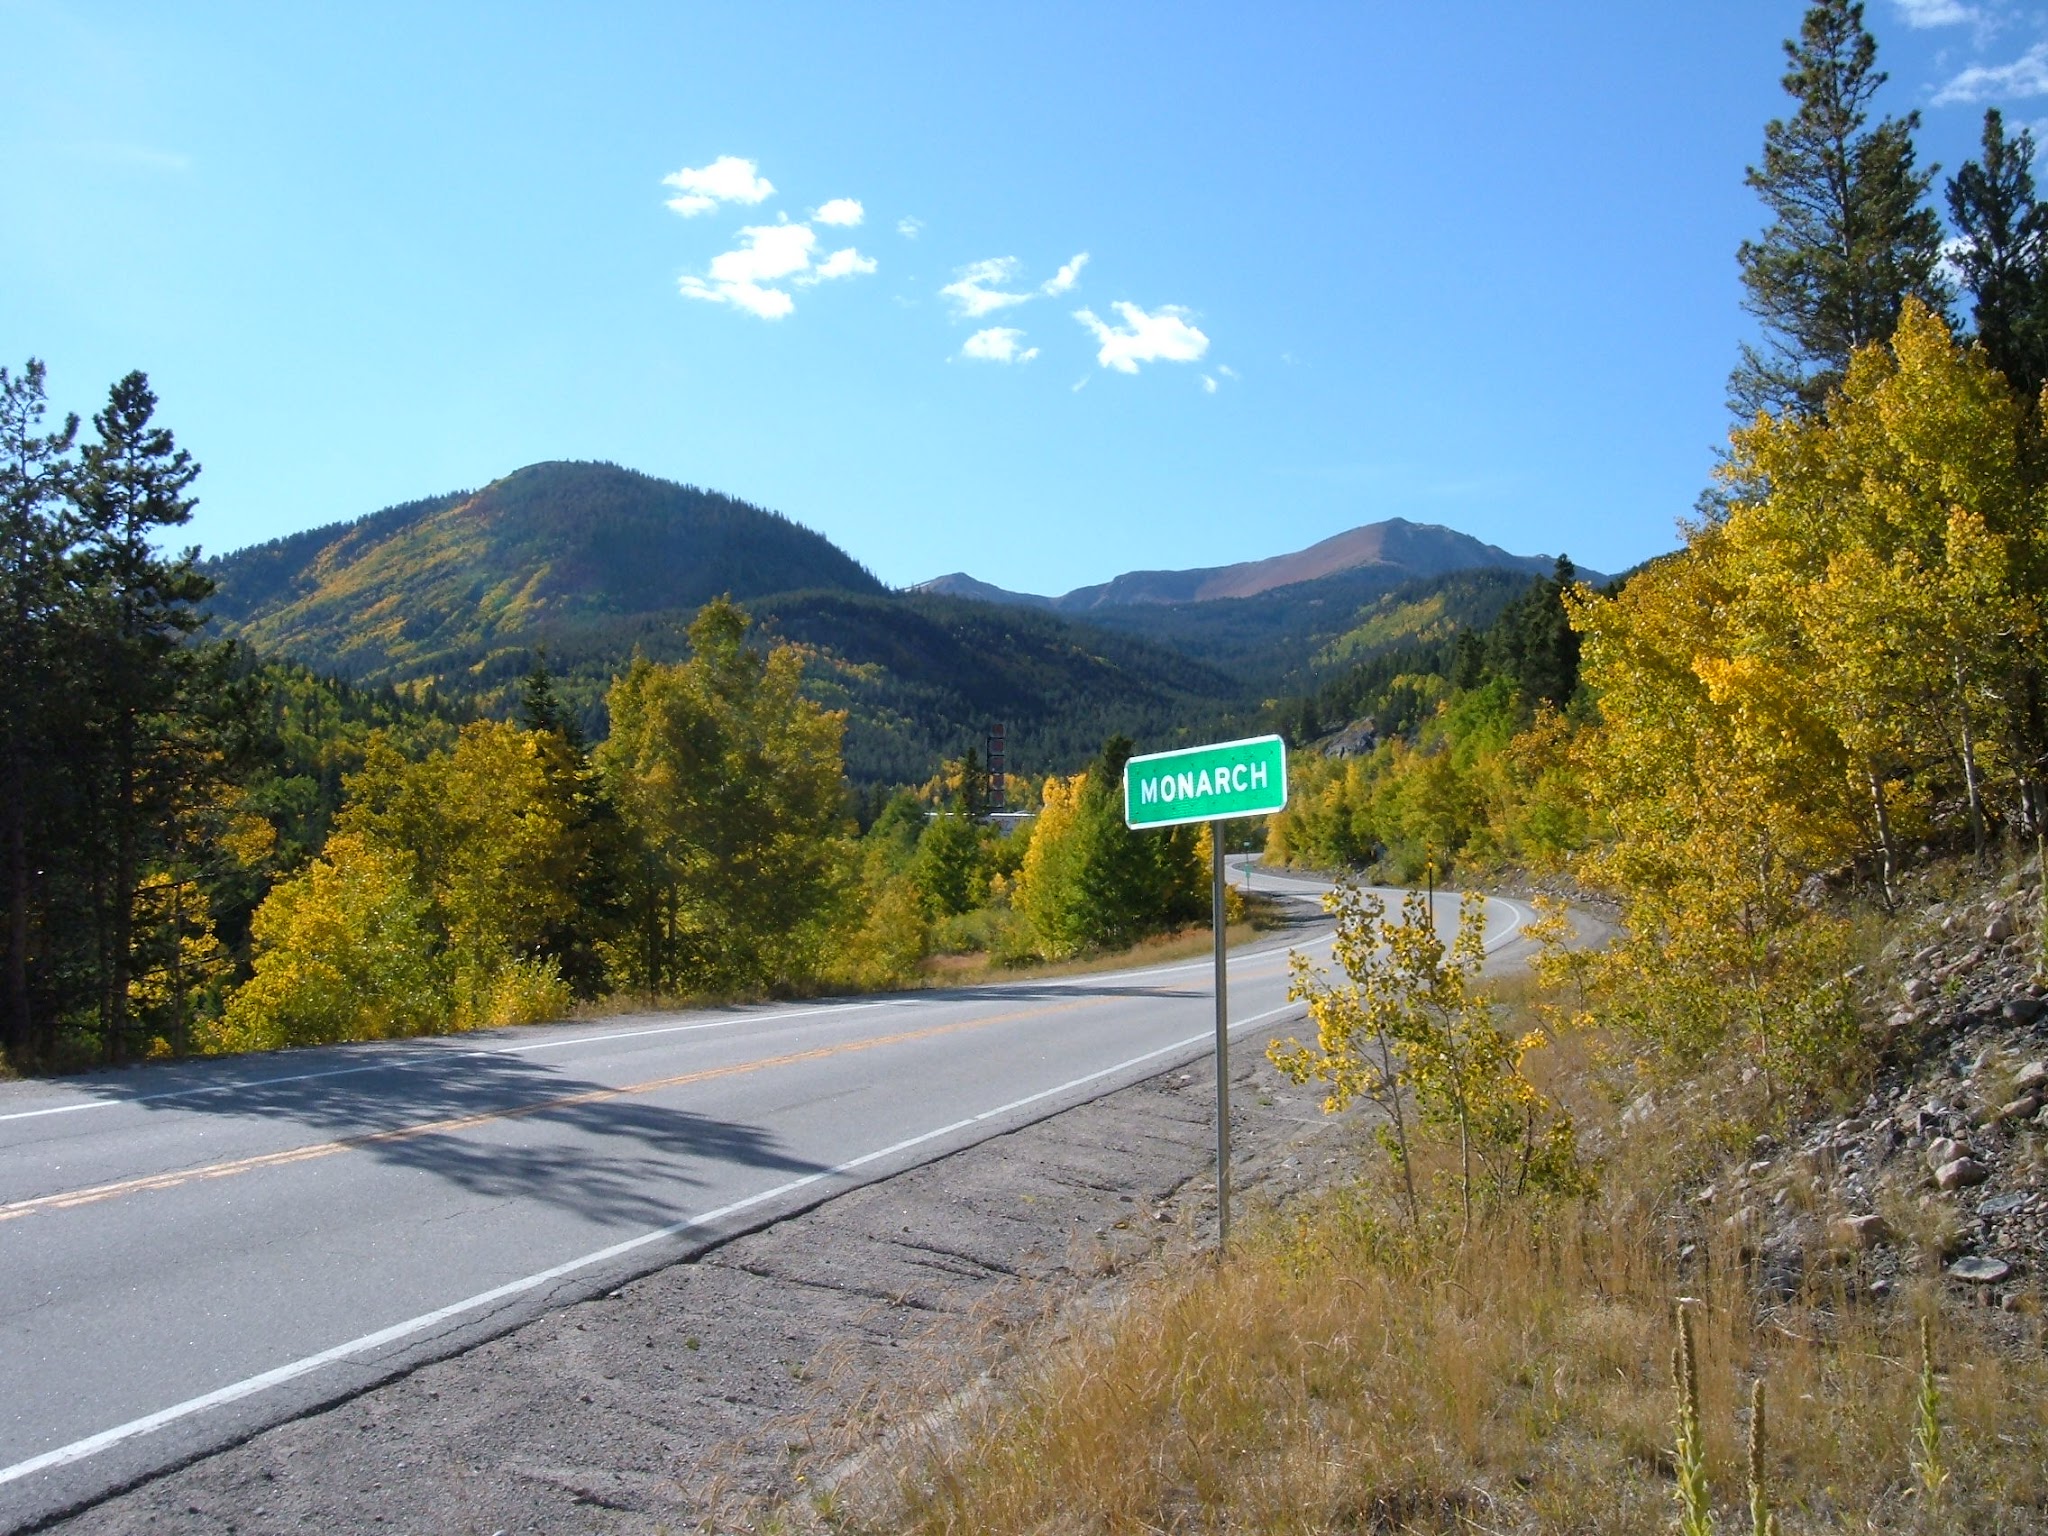 Monarch highway sign along the mountain pass with fall colors all around.